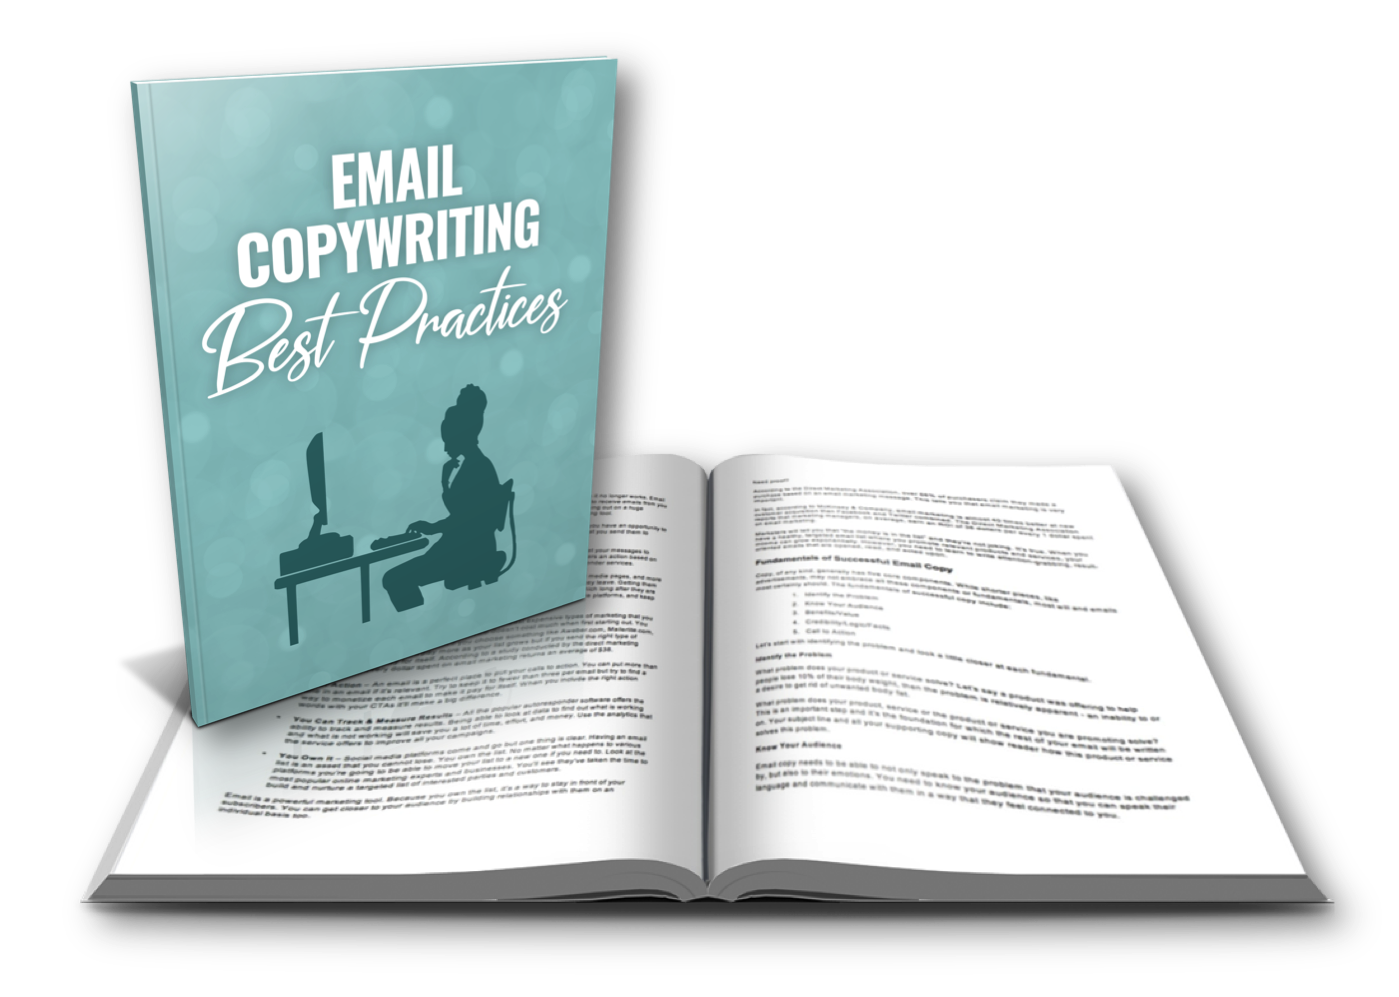 Email Copywriting Best Practices